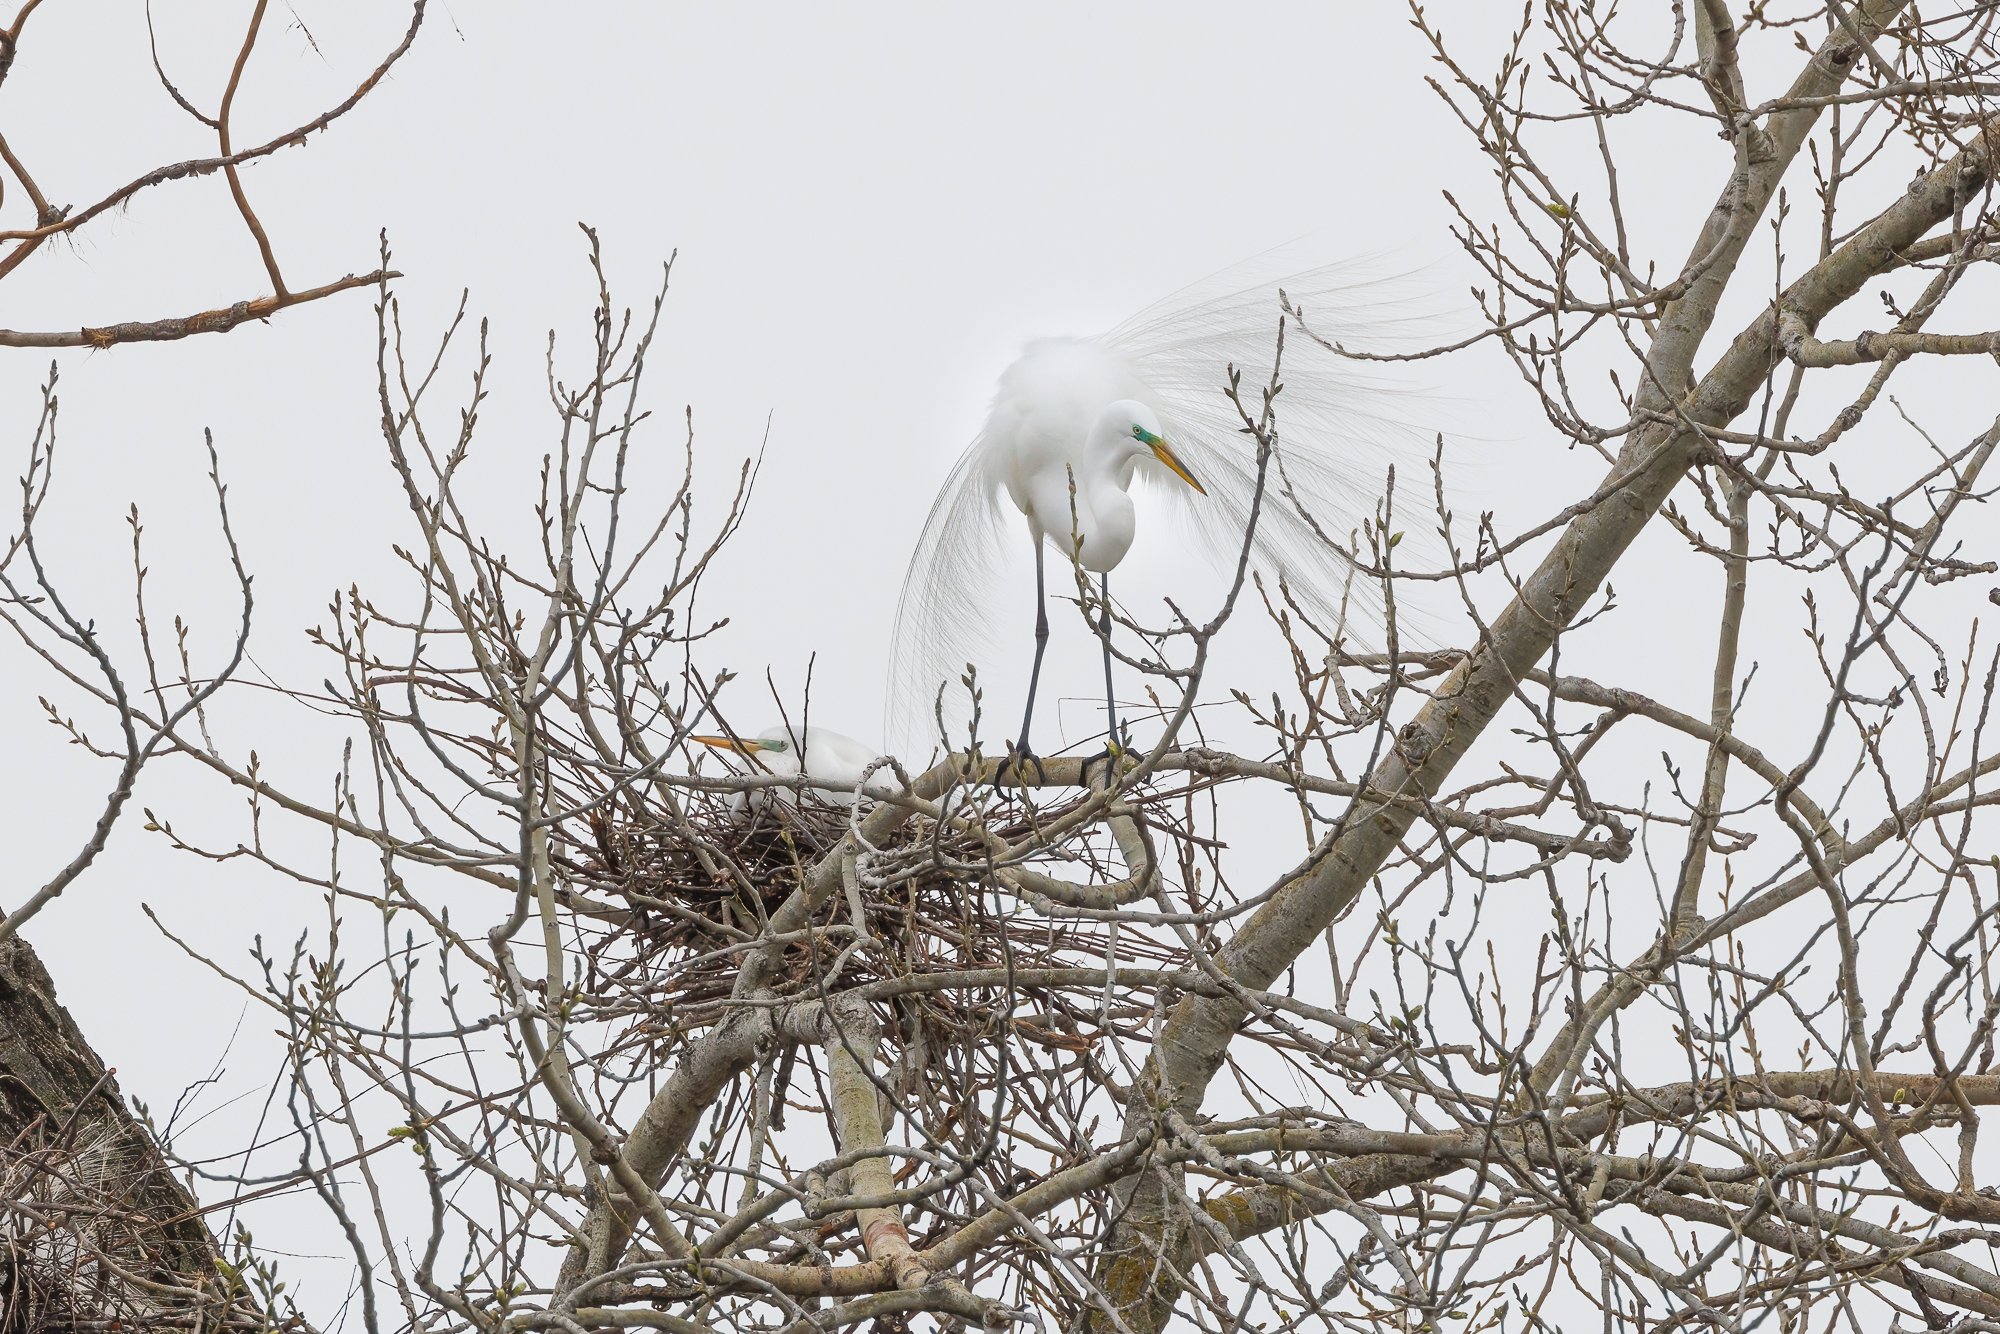 It was raining generously the day I photographed these birds. But, I wasn't about to give up! They were amazing to observe. During courting season the male egret will puff out his chest, spread his wings, and prance around the nest, all while display